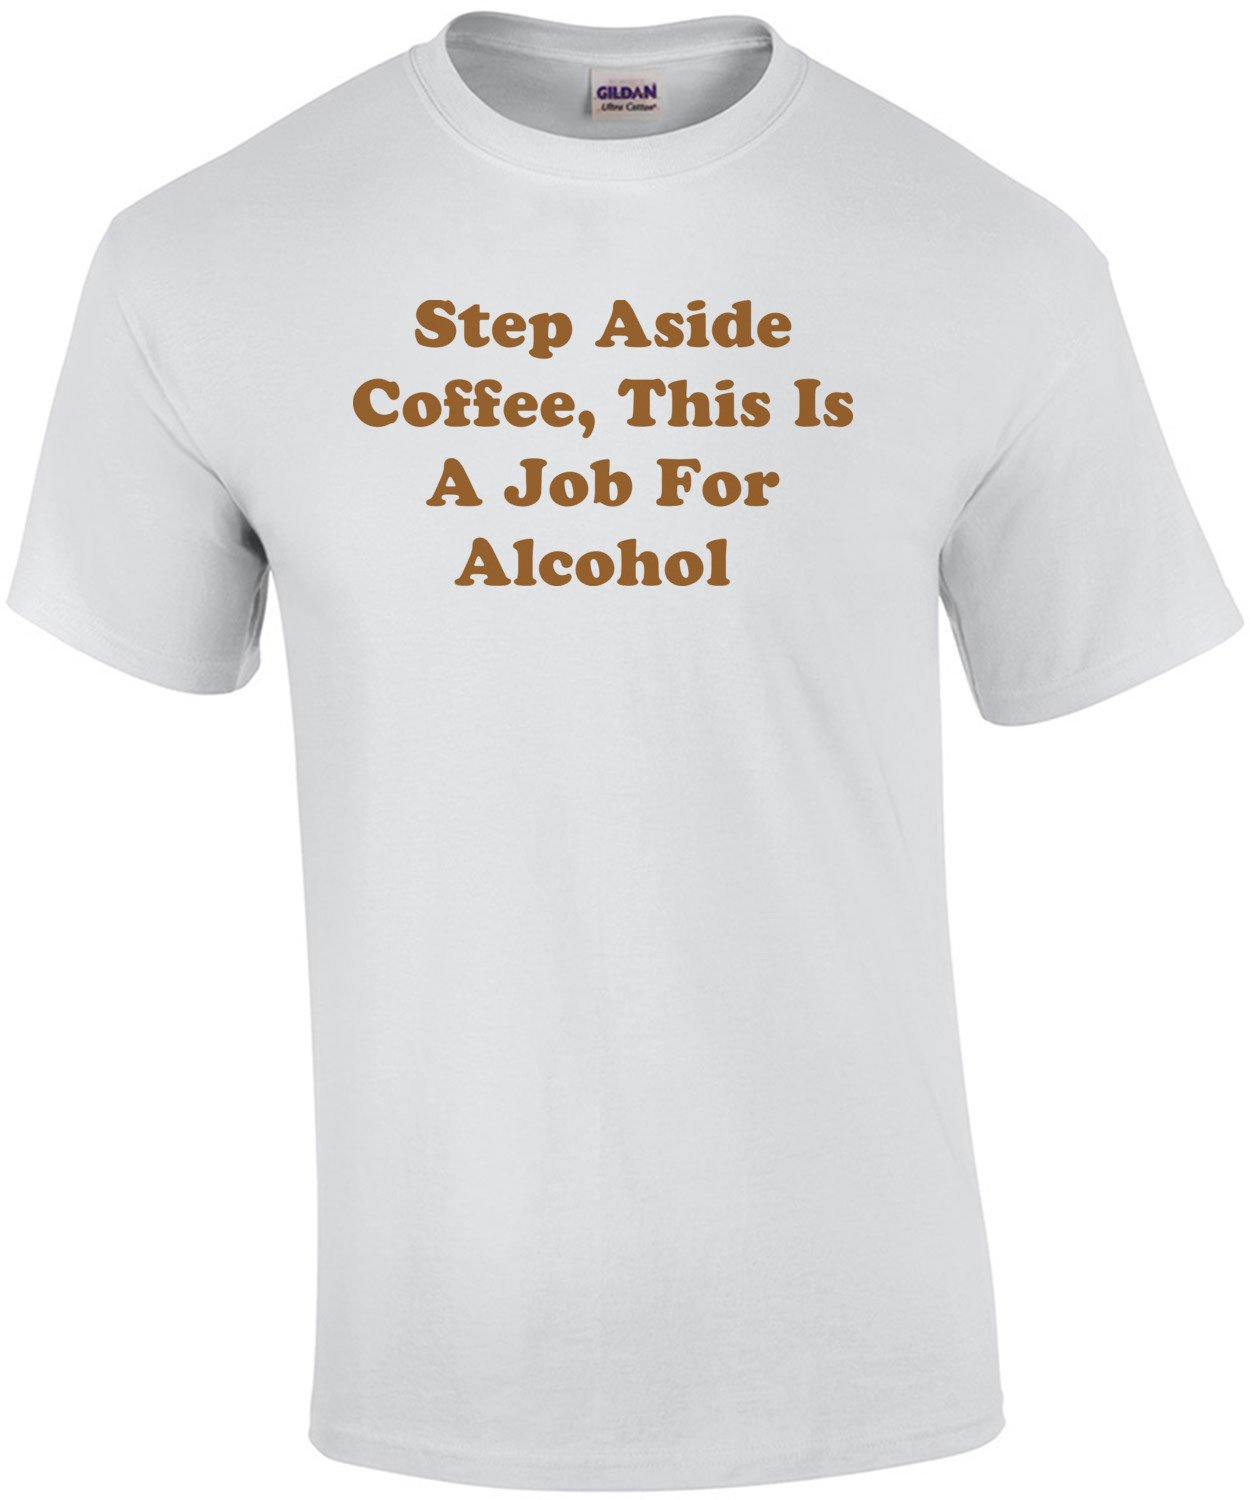 Step Aside Coffee, This Is A Job For Alcohol  Shirt